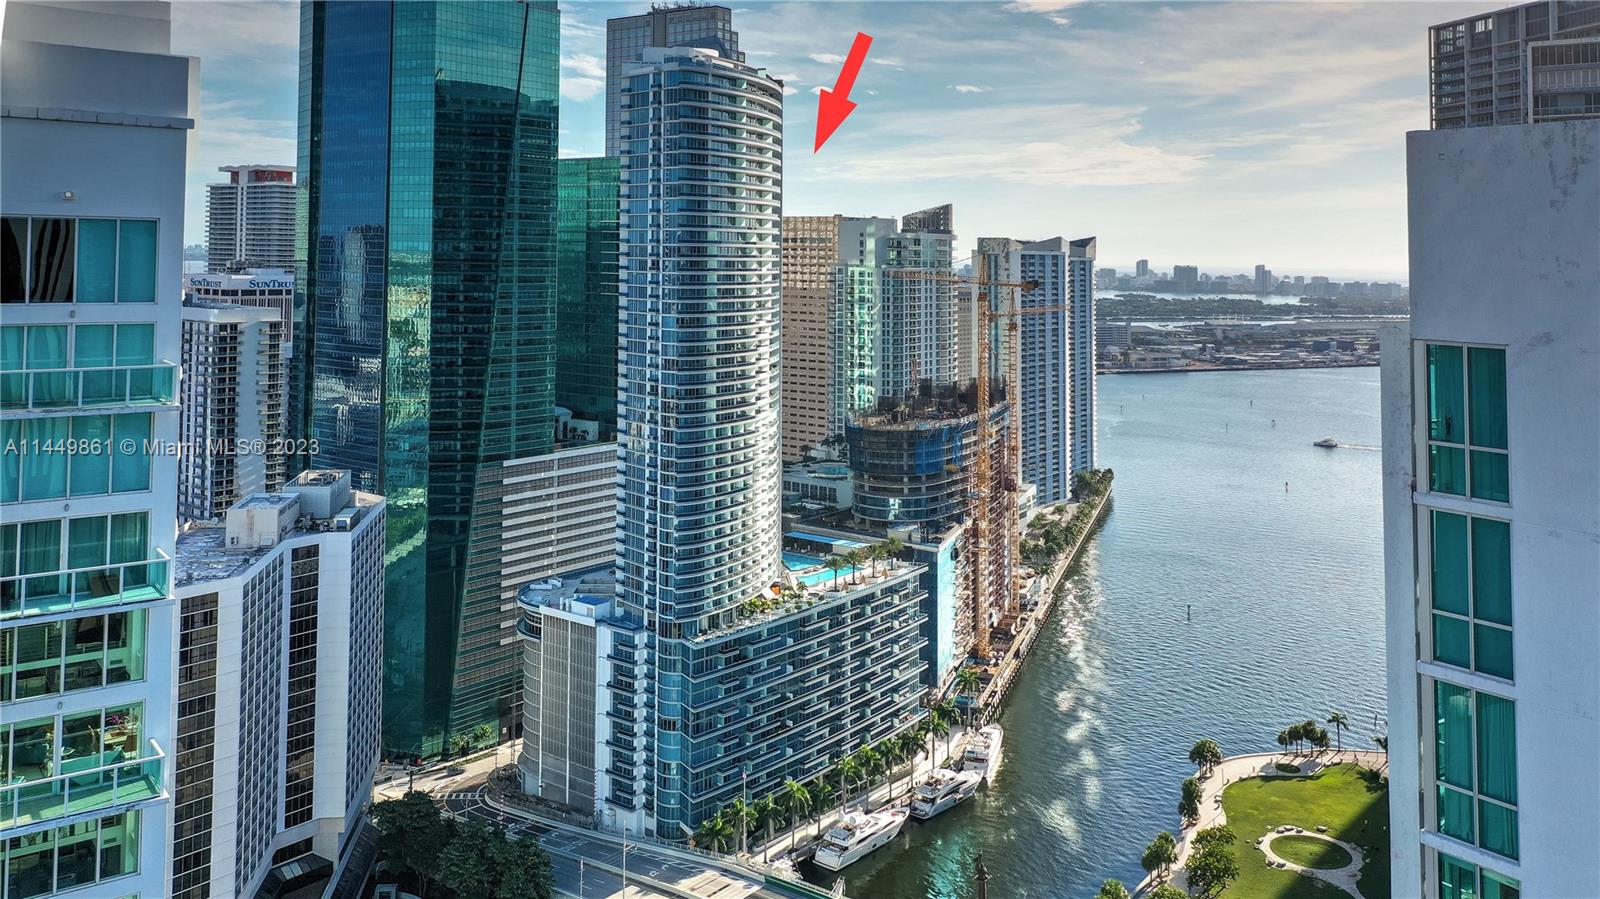 Exclusive modern double "ONE OF A KIND" lower penthouse at Epic Condo, Downtown Miami. 4 bed/ 4 bath/ 2 half baths, 2 kitchens, 2 living rooms, 2 dinning areas, 2 laundry areas, 3 parking spaces. Top-notch finishes, 48x48 floors, city & water views, 2 kitchens with sub-zero appliances, oversized balconies & more. Prestigious building home to Zuma restaurant, pools, 5-star spa/yoga/fitness center. Walking distance to Brickell, Bayside, Novikov & II Gabbiano. Whole Foods, Silver spot Cinema nearby. Ideal for large families that want to have some privacy and comfort.